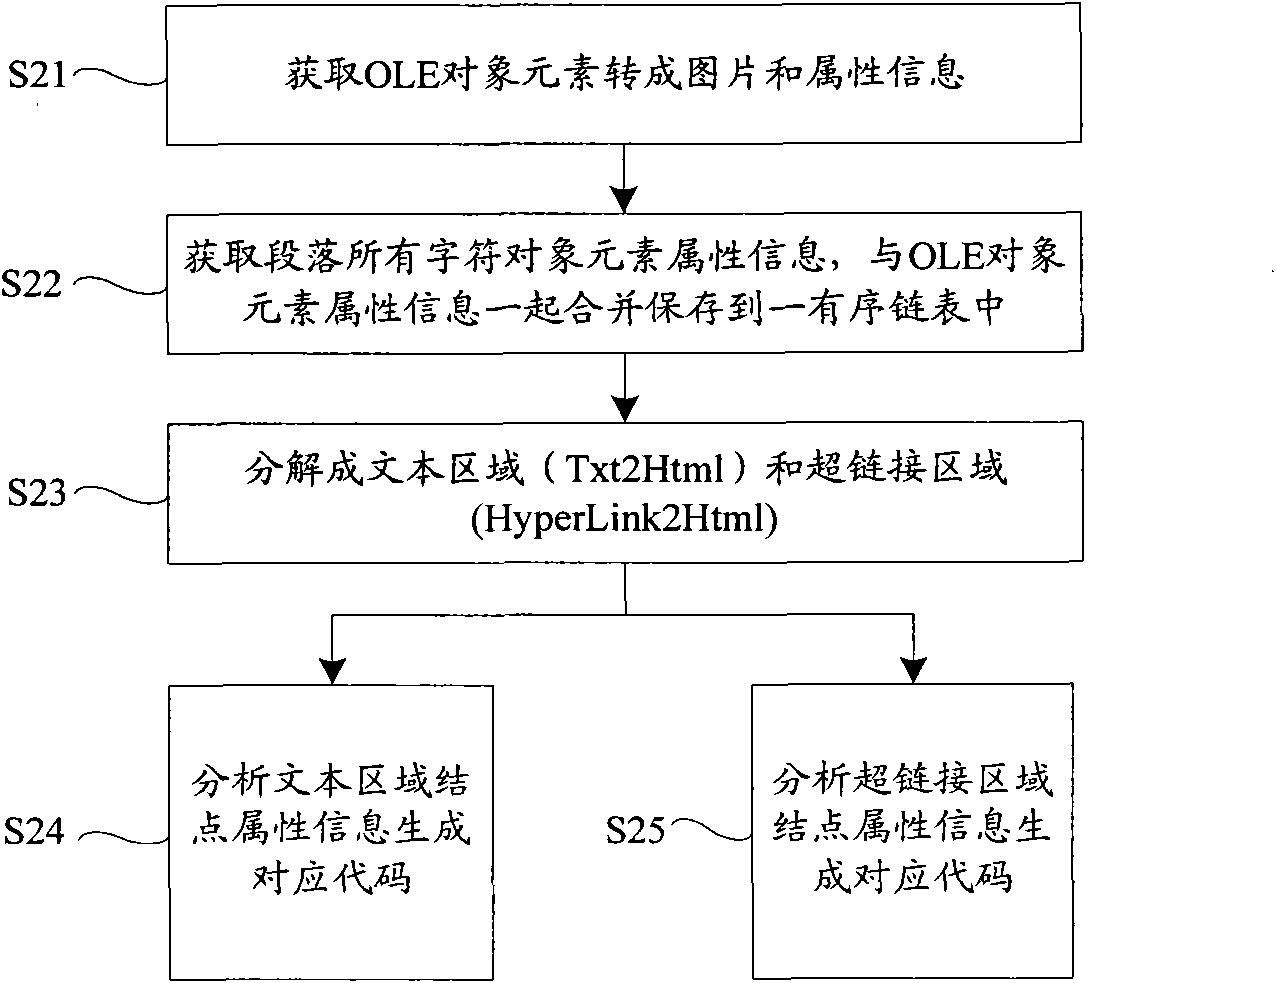 Method for editing rich text and for restoring and displaying rich text through FLASH